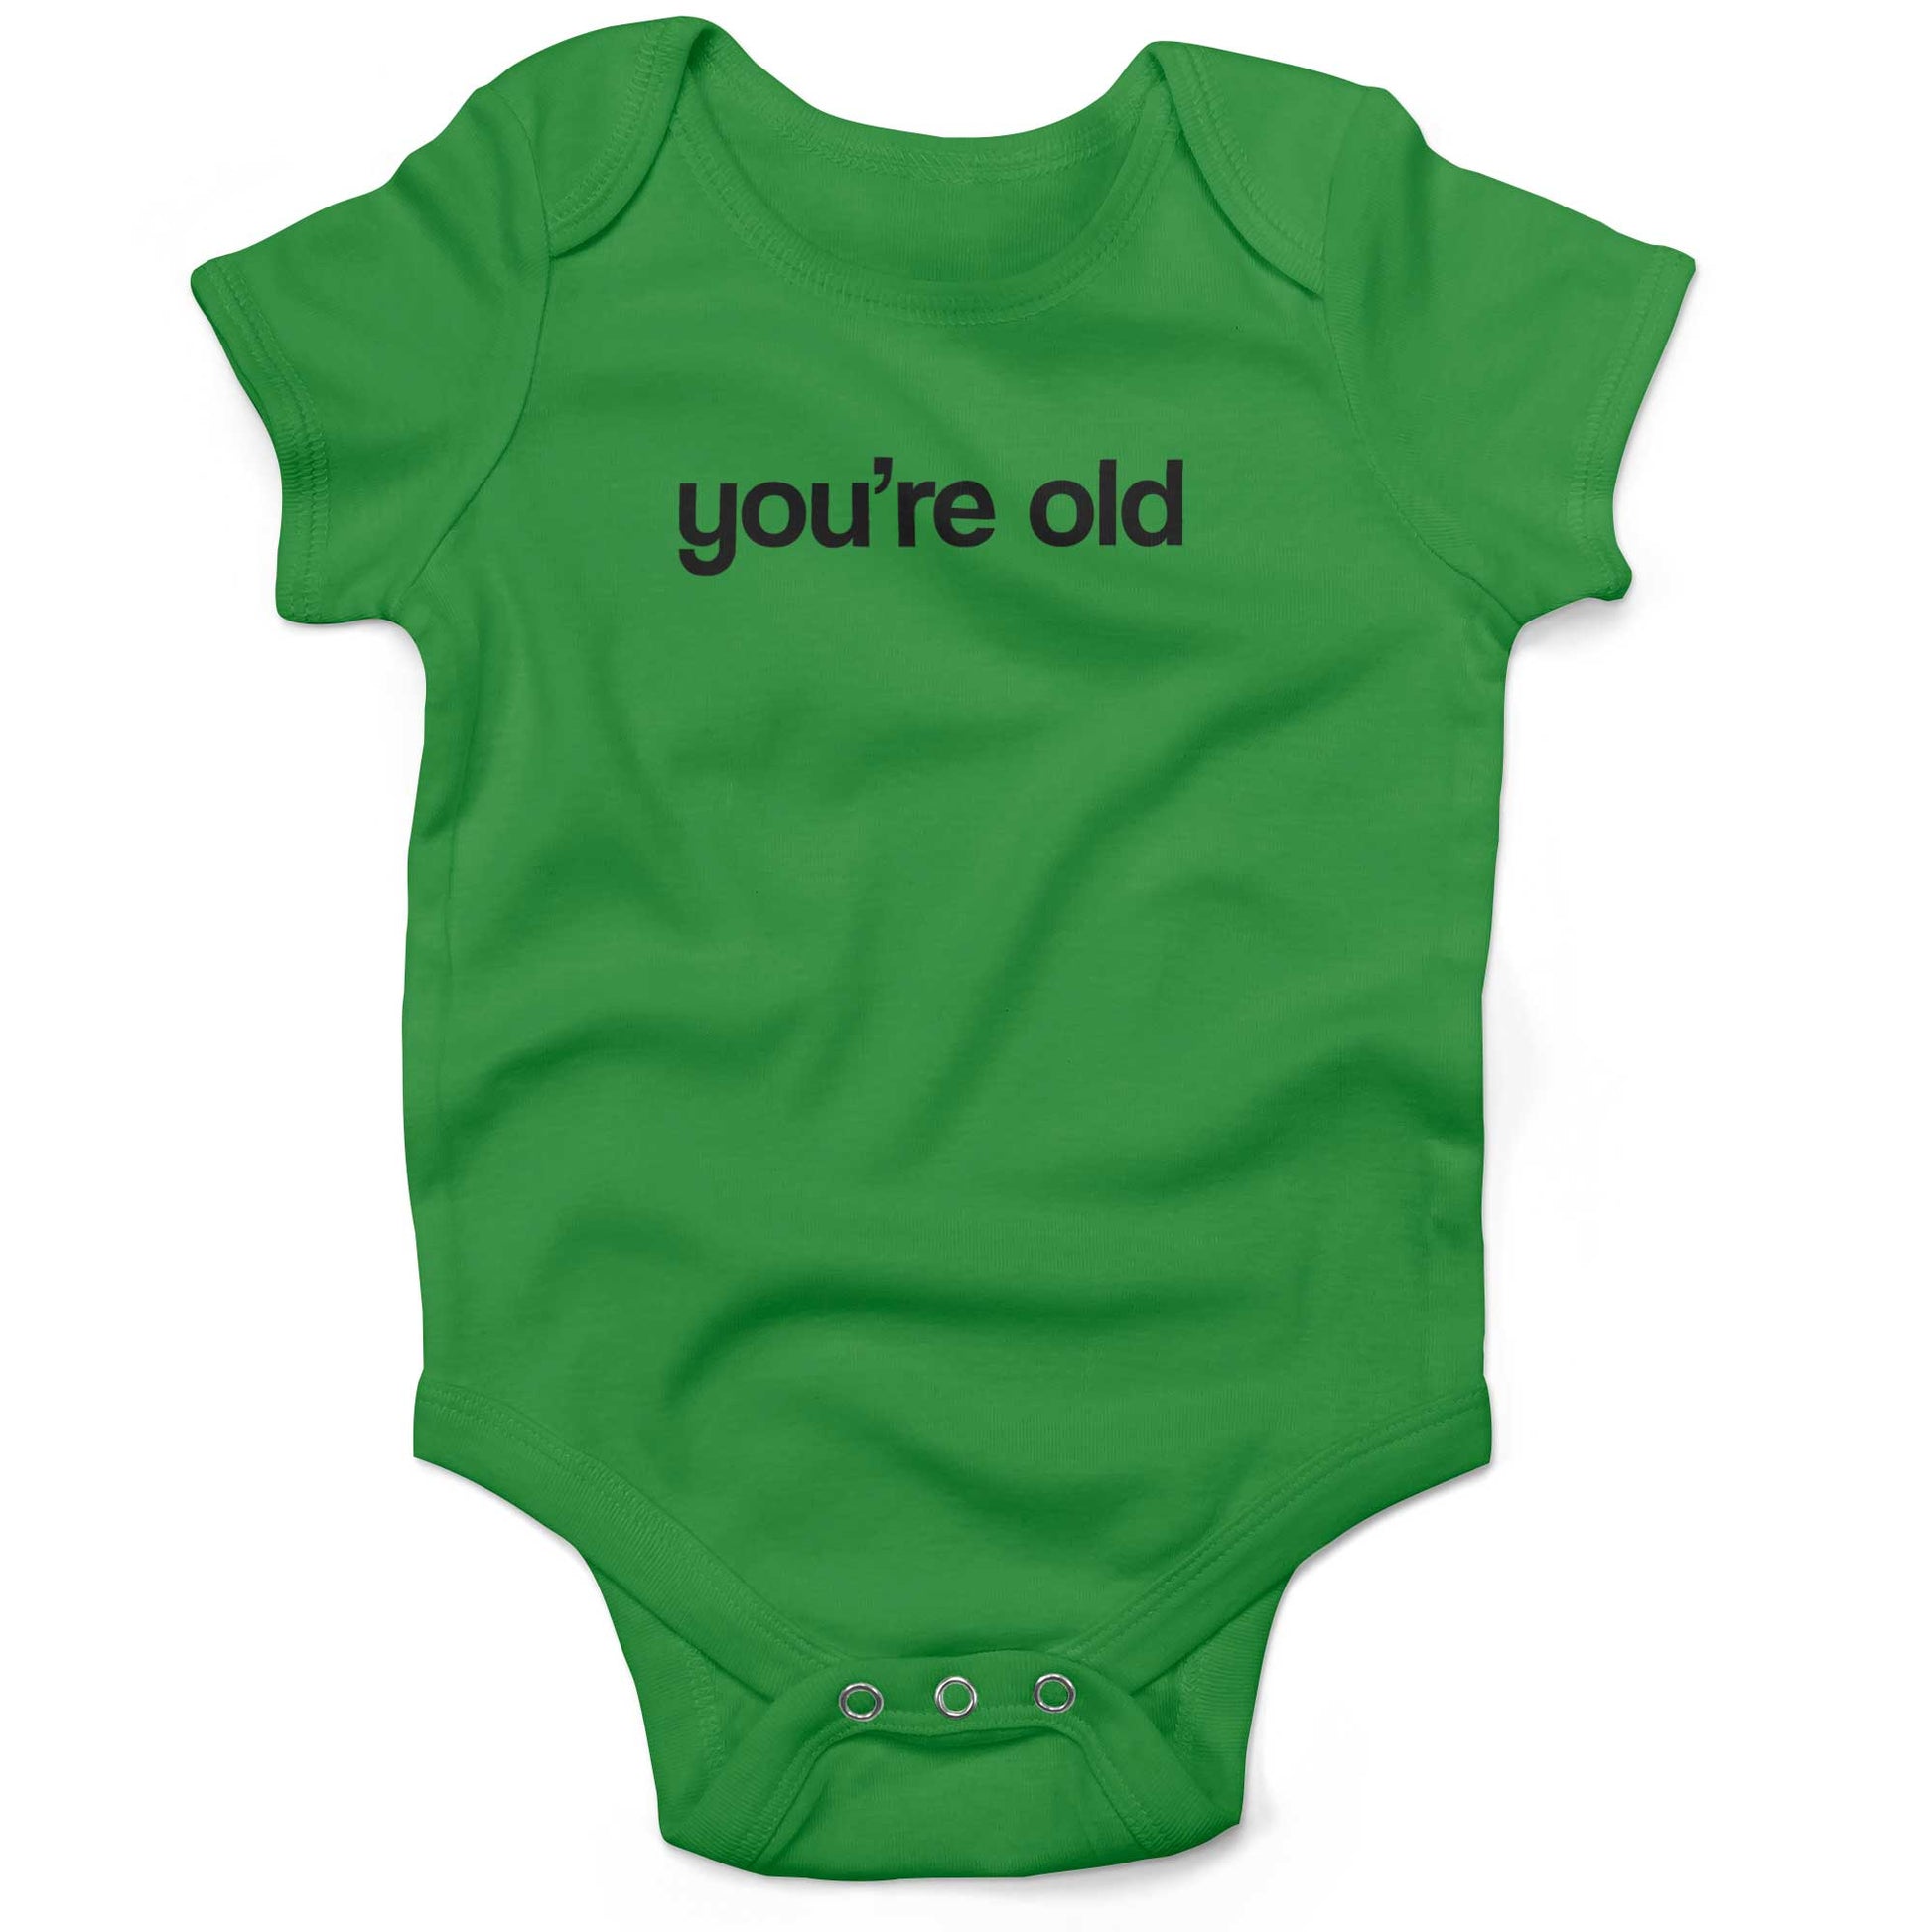 You're Old Infant Bodysuit or Raglan Tee-Grass Green-3-6 months